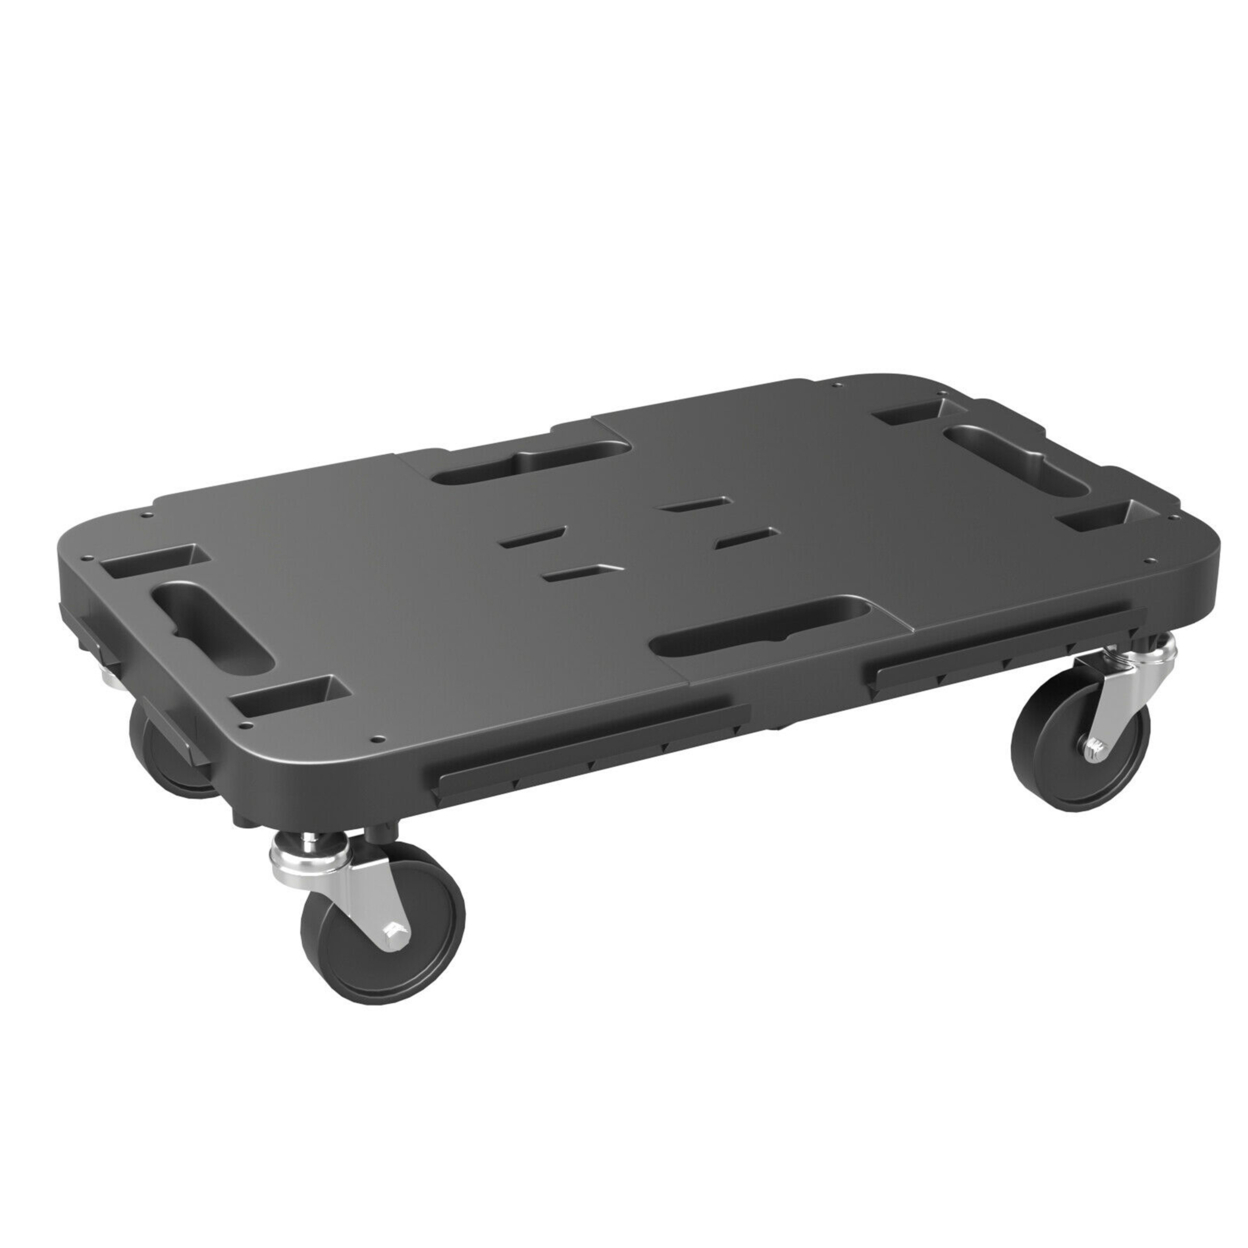 Platform Dolly Interlocking Furniture Mover 660lbs Weight Capacity - 1 Pc